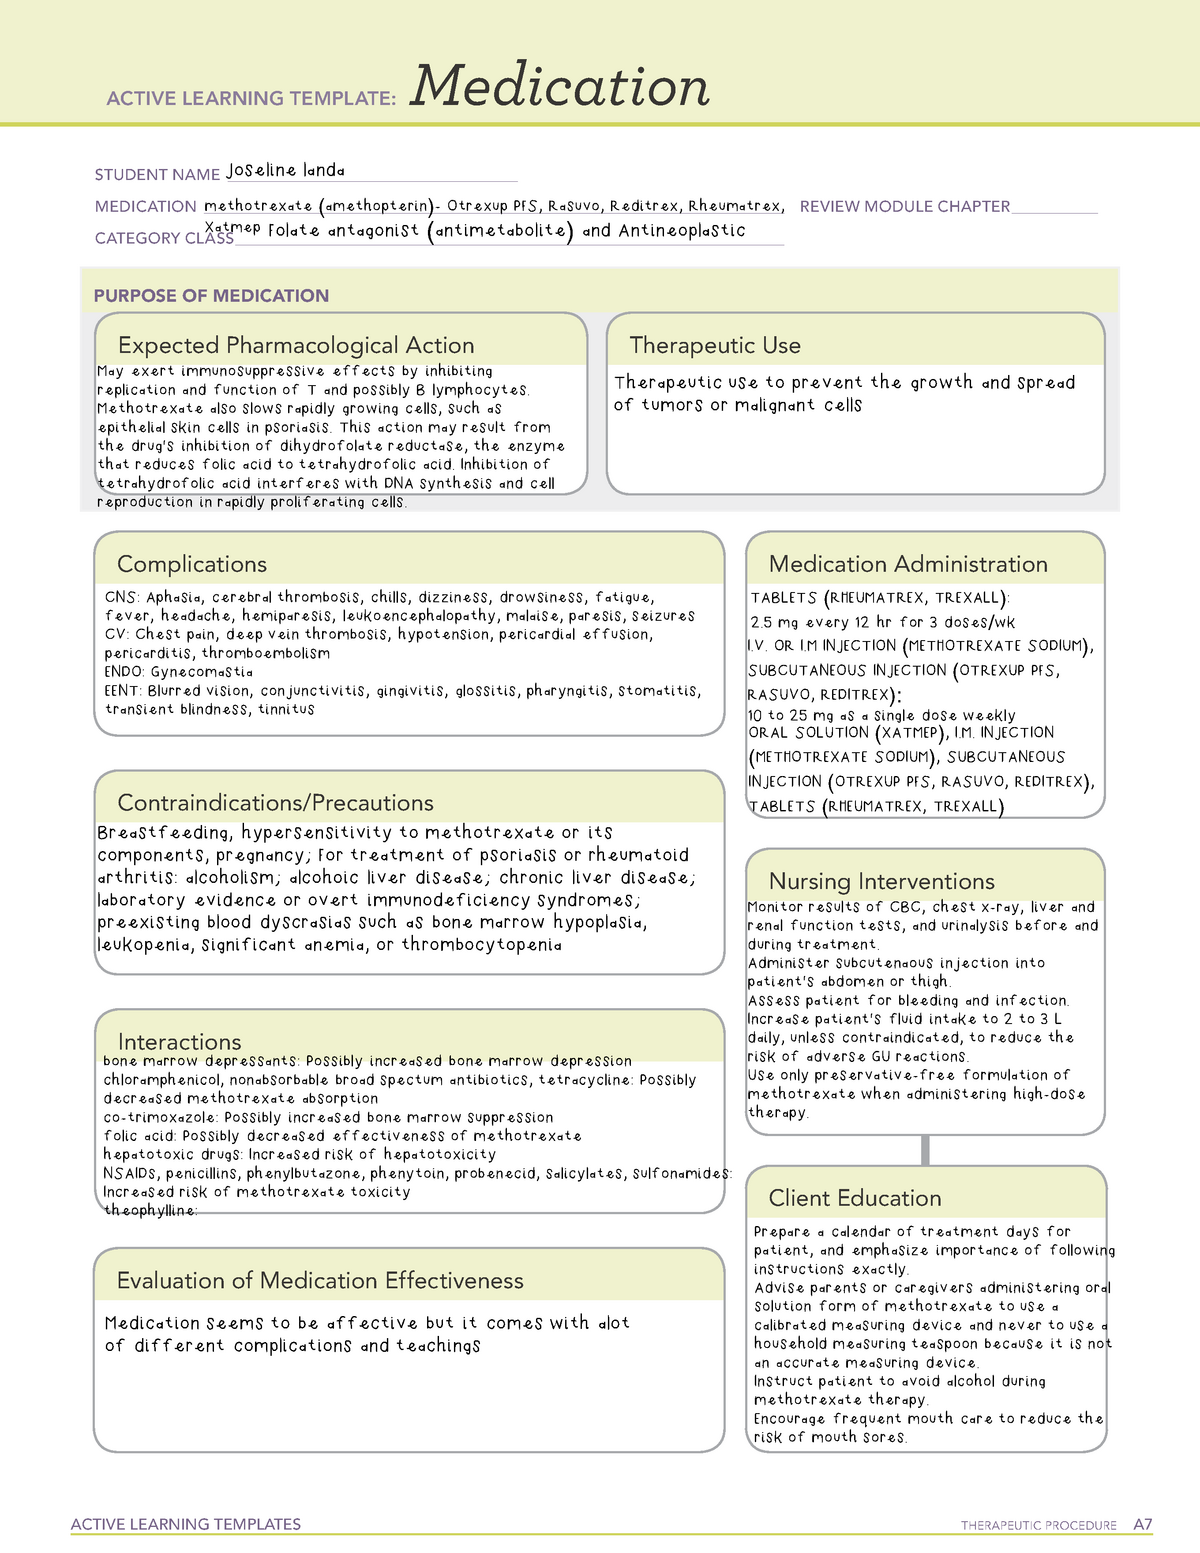 methotrexate-med-map-active-learning-templates-therapeutic